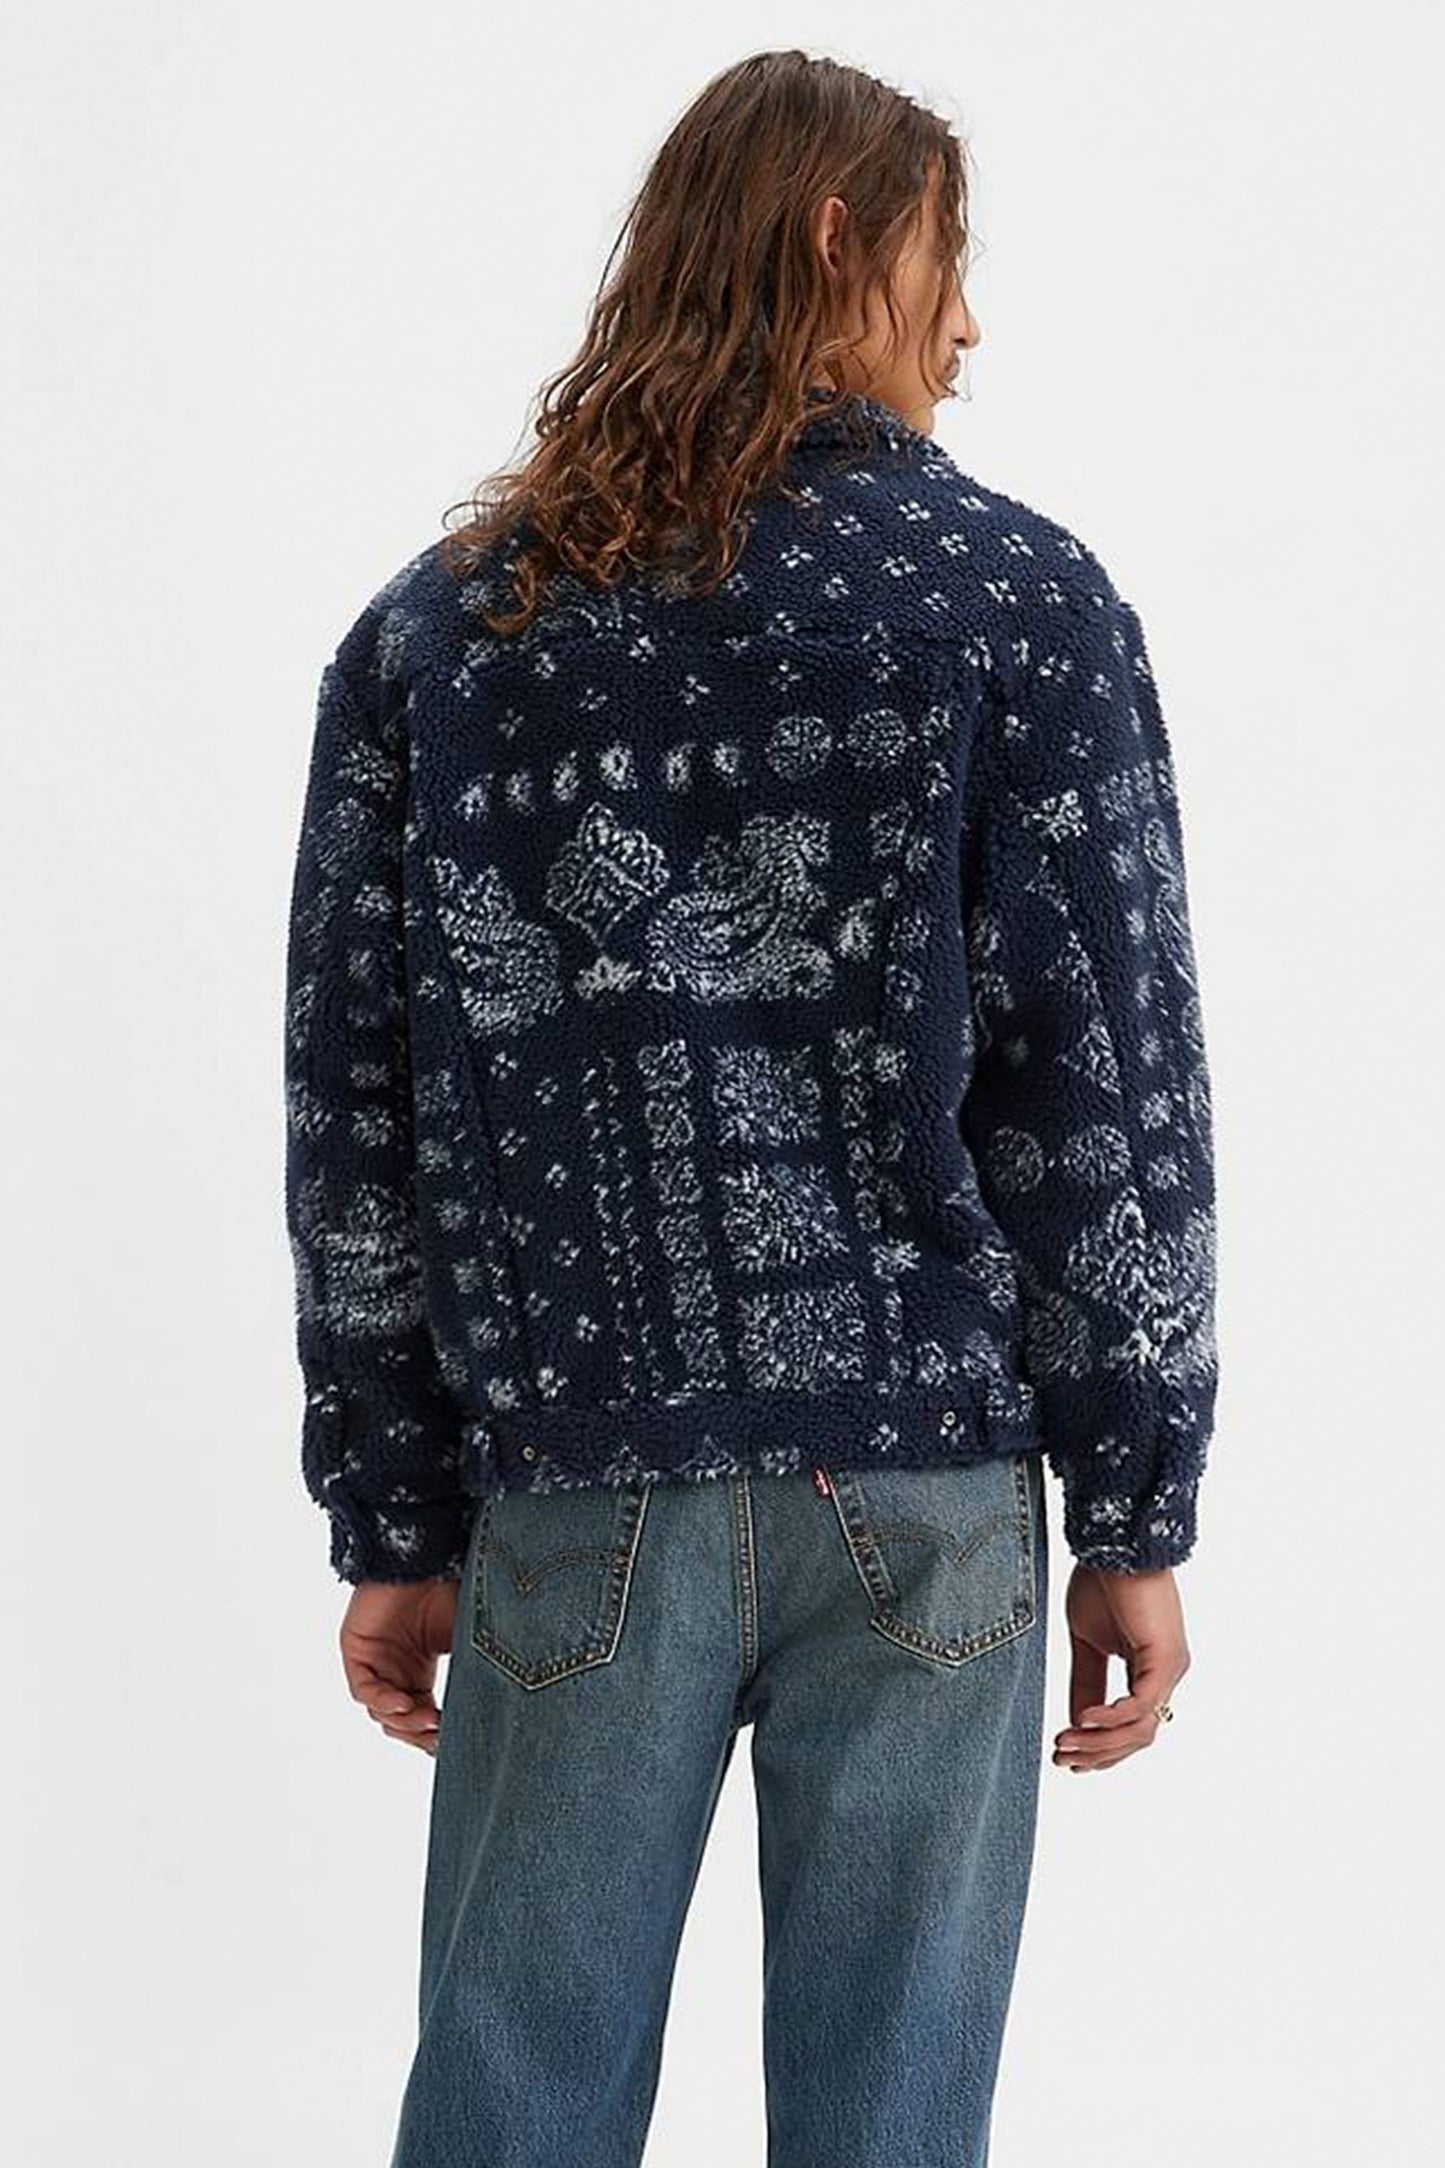 Pukas-Surf-Shop-Levis-new-relaxed-fit-cozy-sherpa